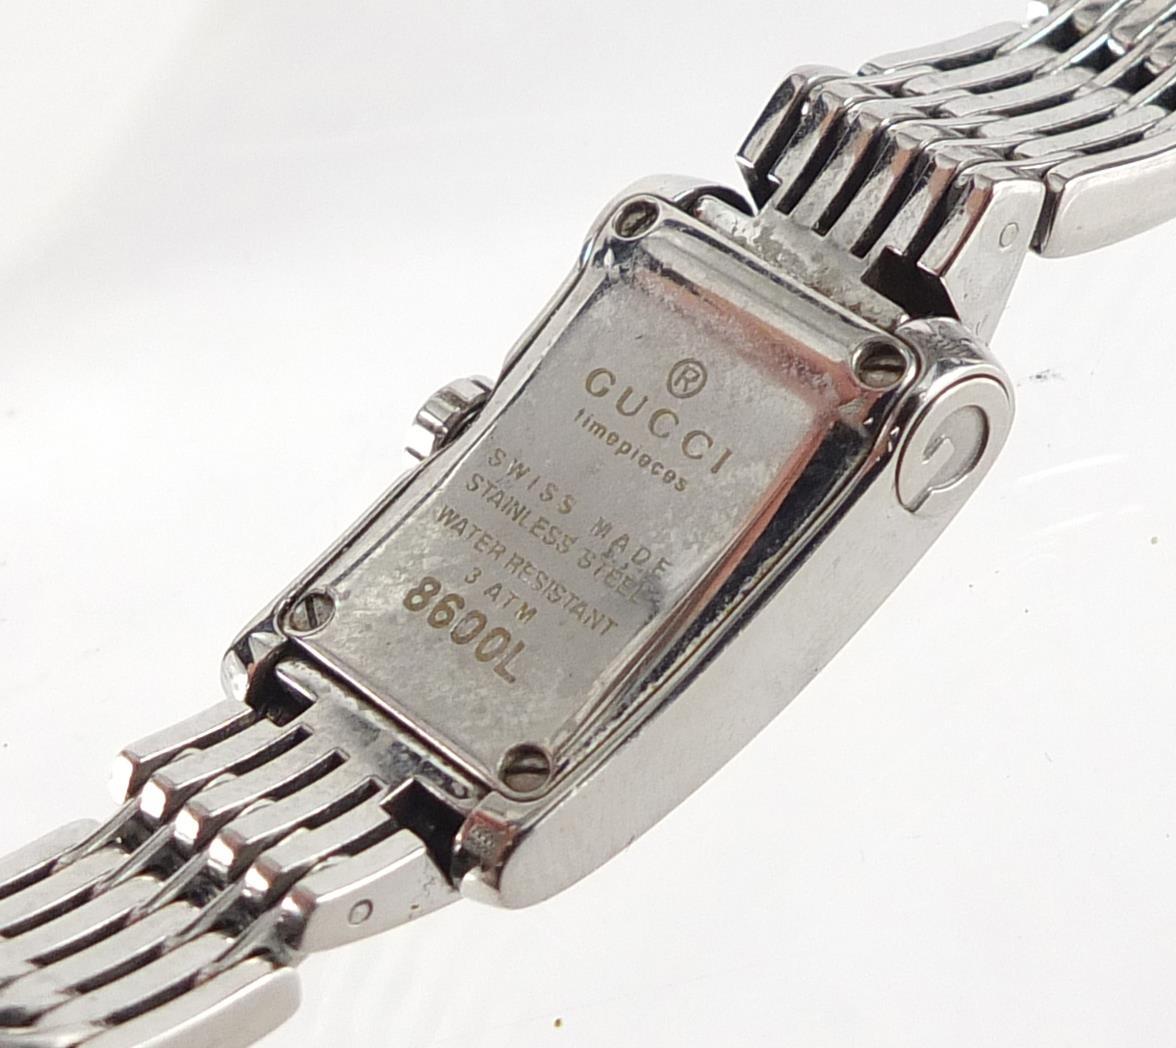 Gucci, ladies stainless steel wristwatch numbered 8600L, the case 14.5mm wide - Image 5 of 5